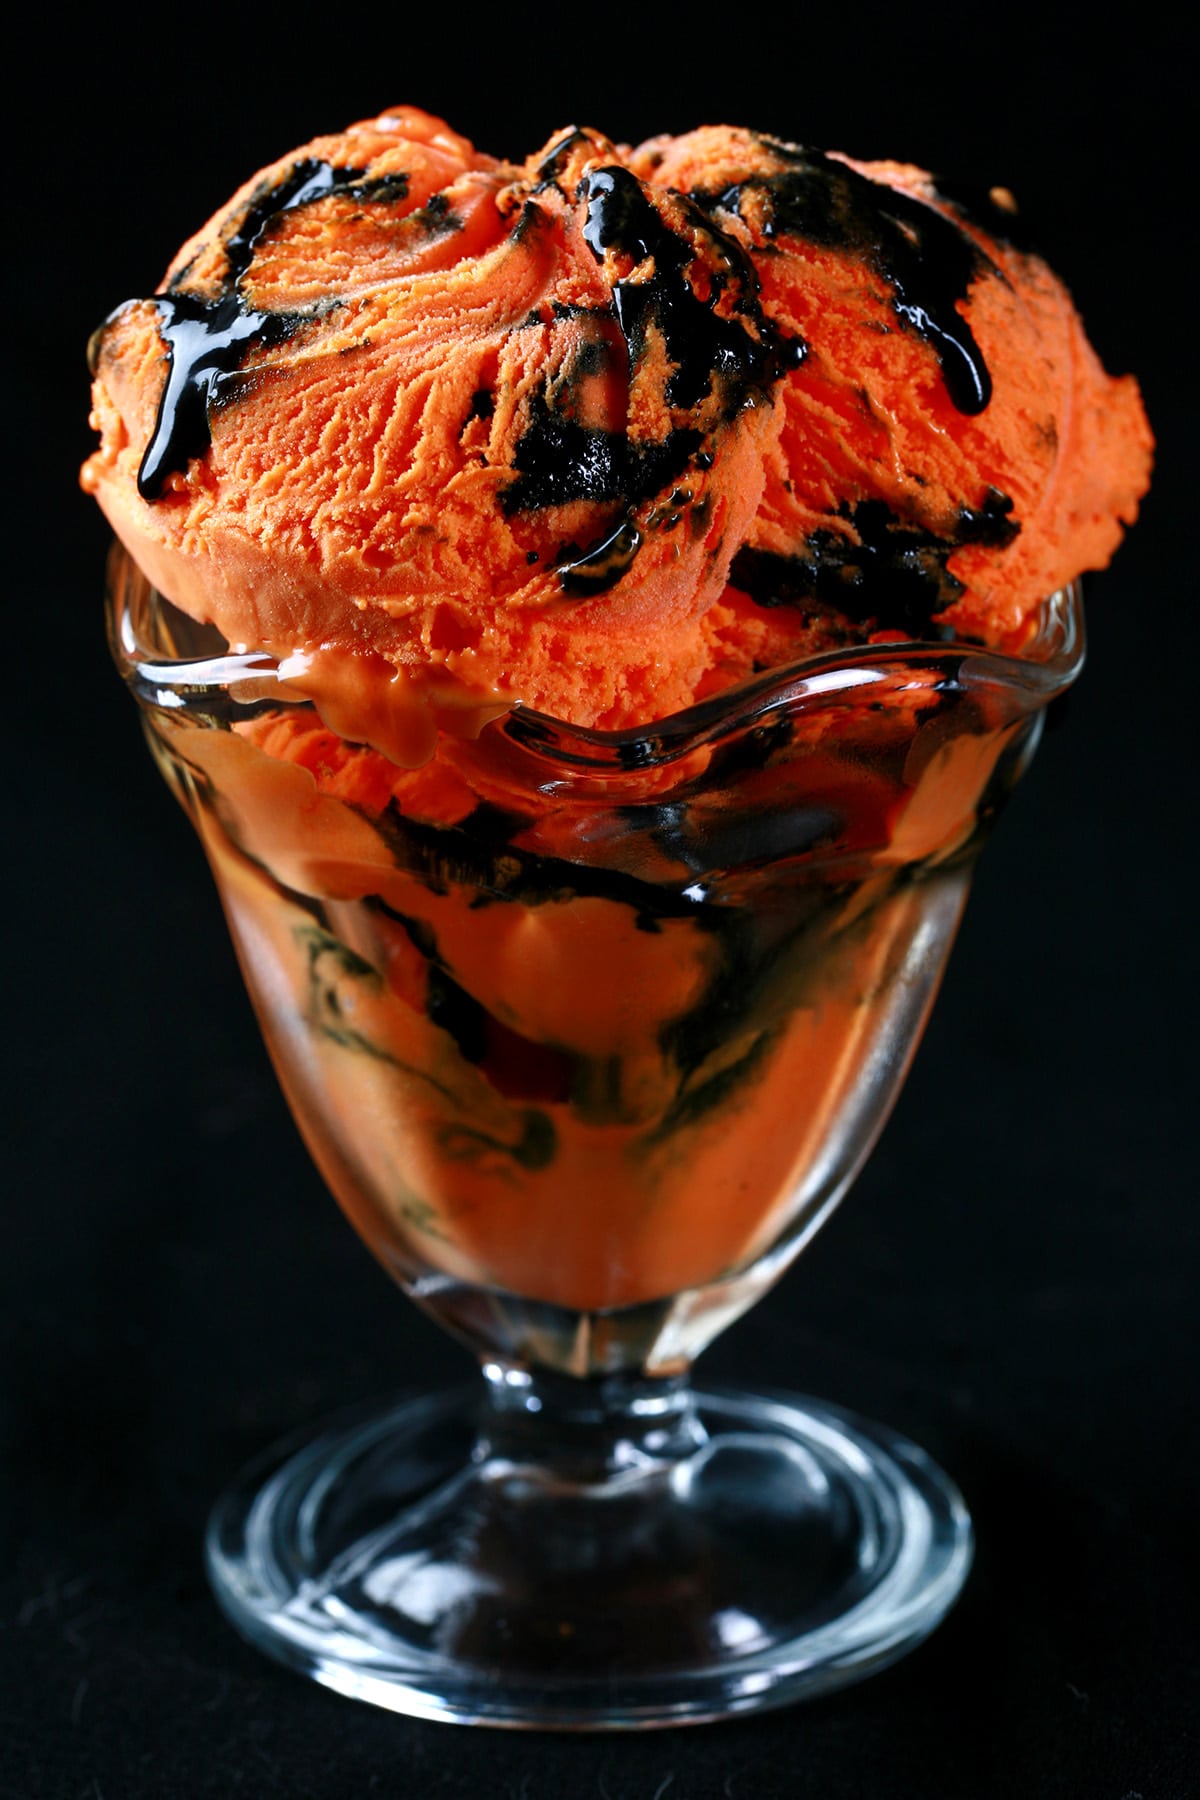 A fluted glass dessert bowl with 2 big scoops of Tiger Tail Ice Cream - Orange ice cream with a licorice ribbon throughout.